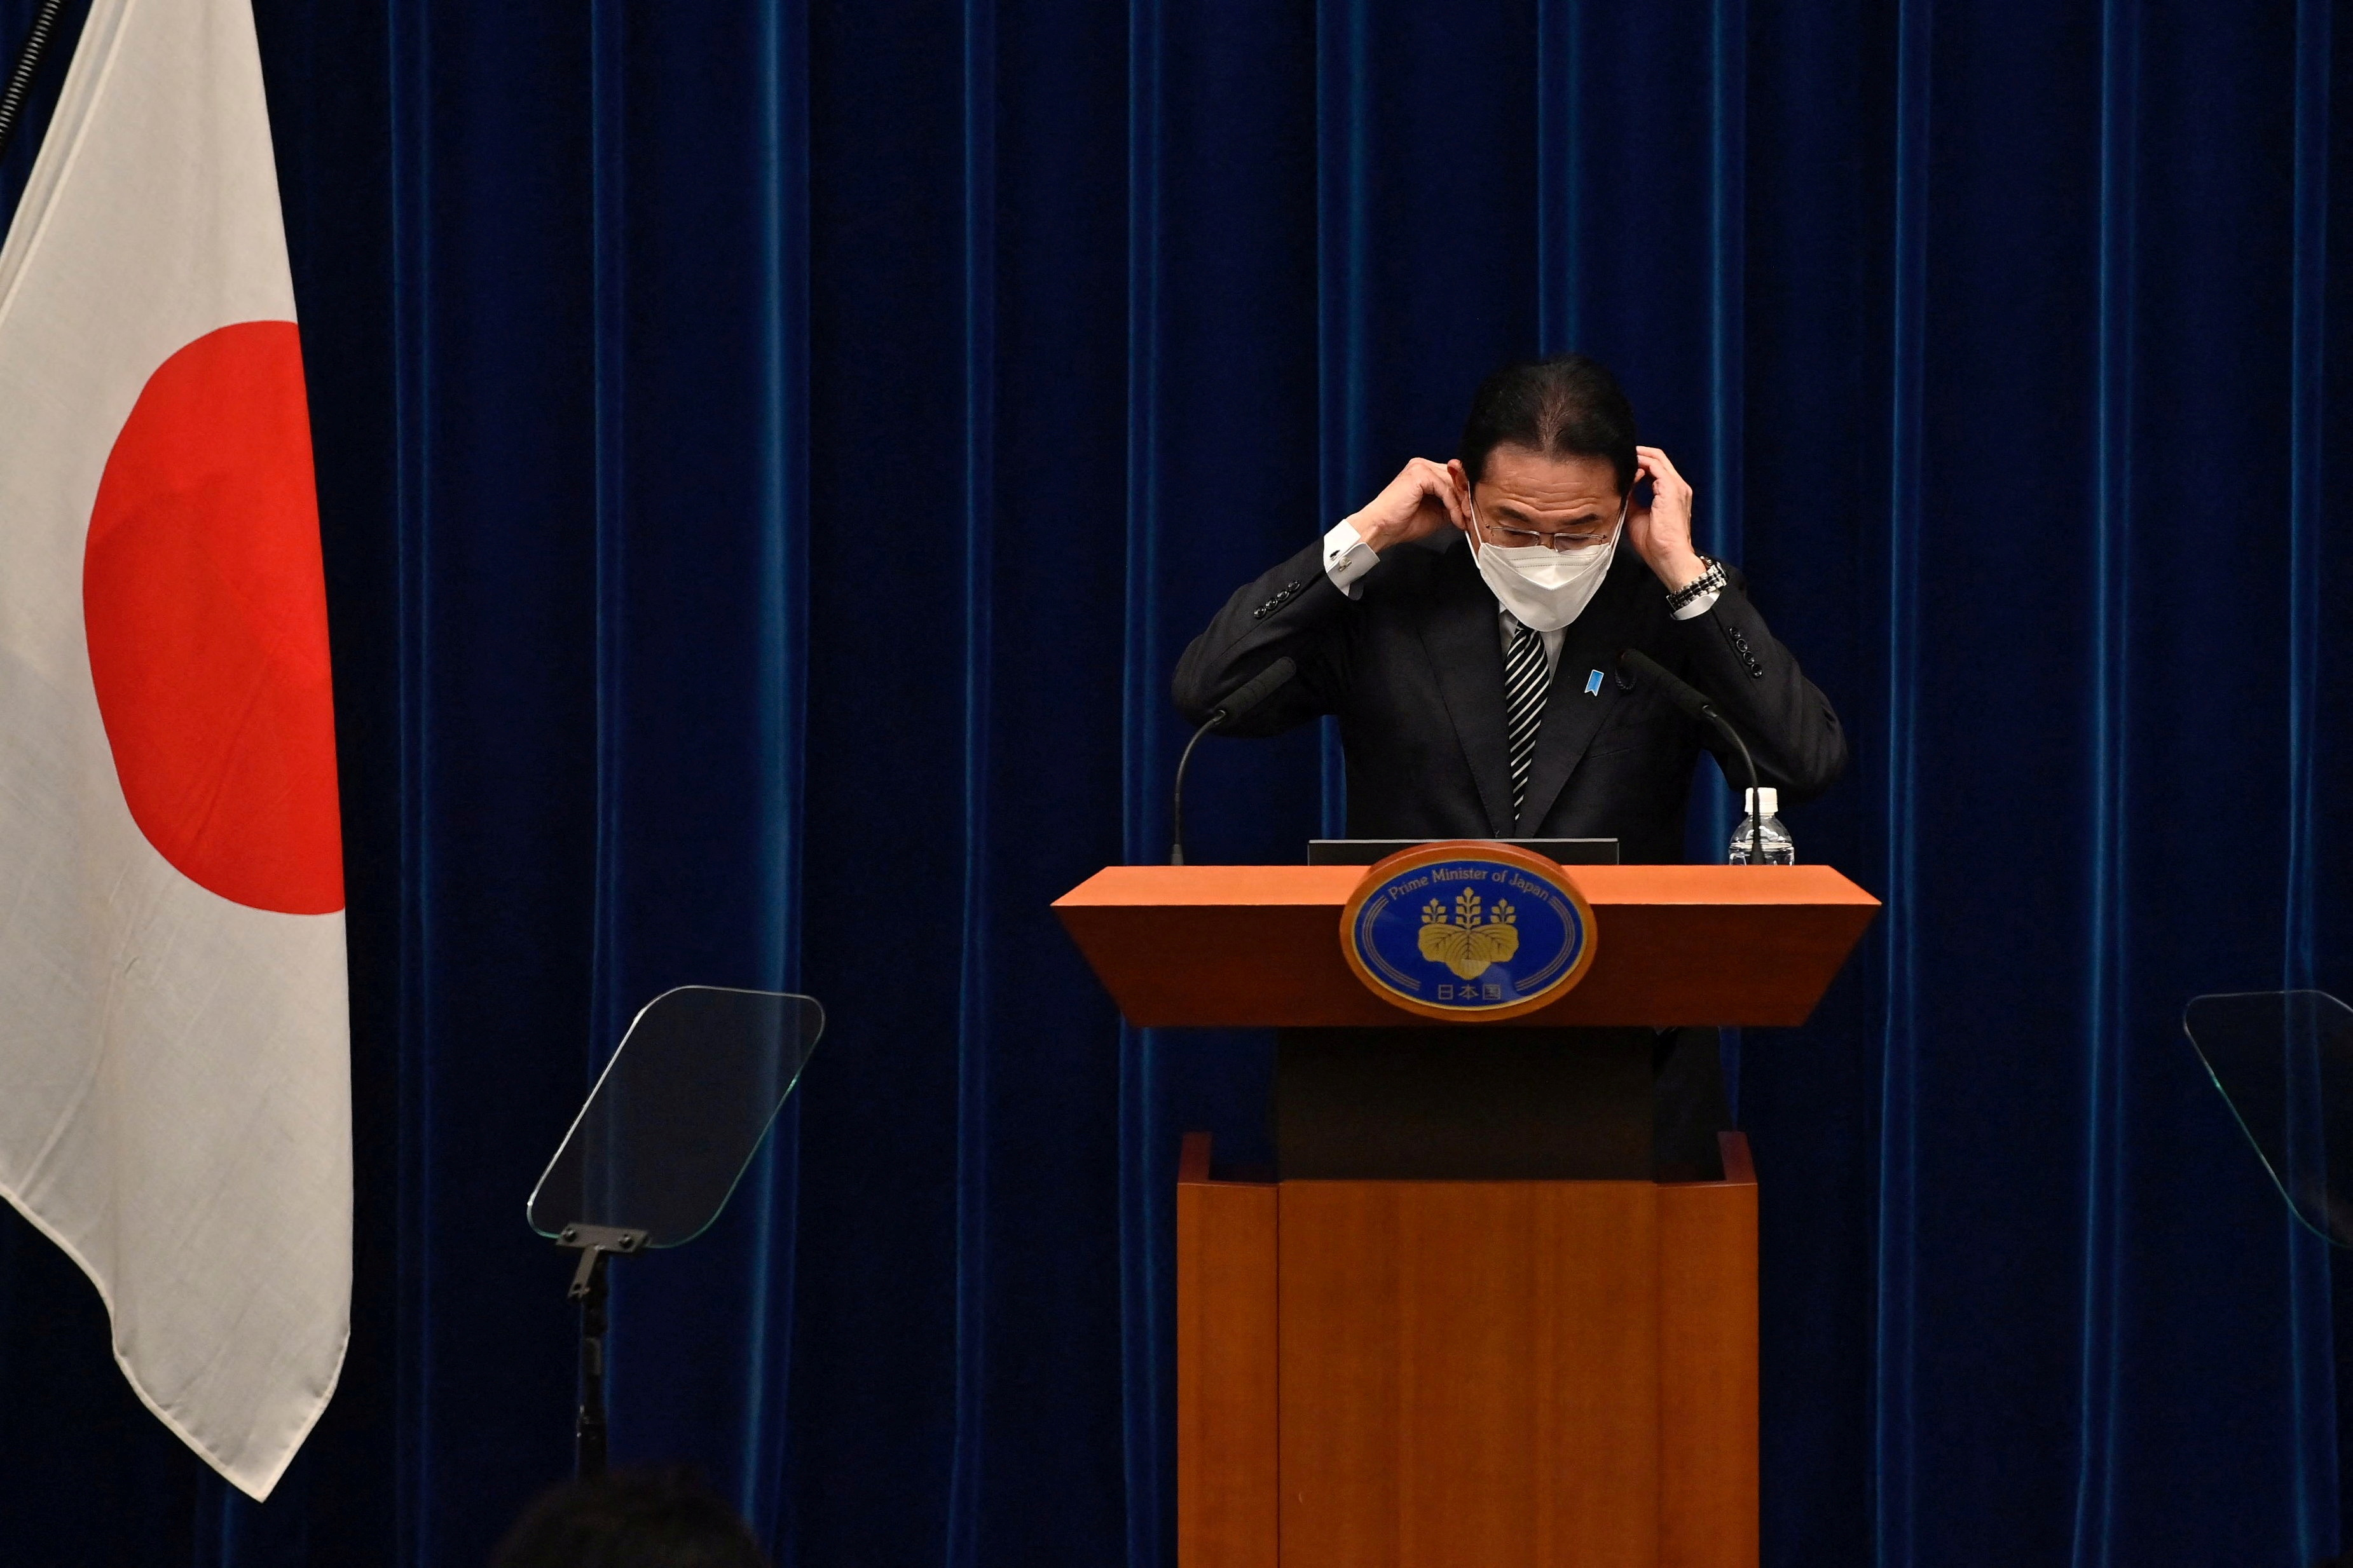 Japan's PM Kishida attends a news conference in Tokyo